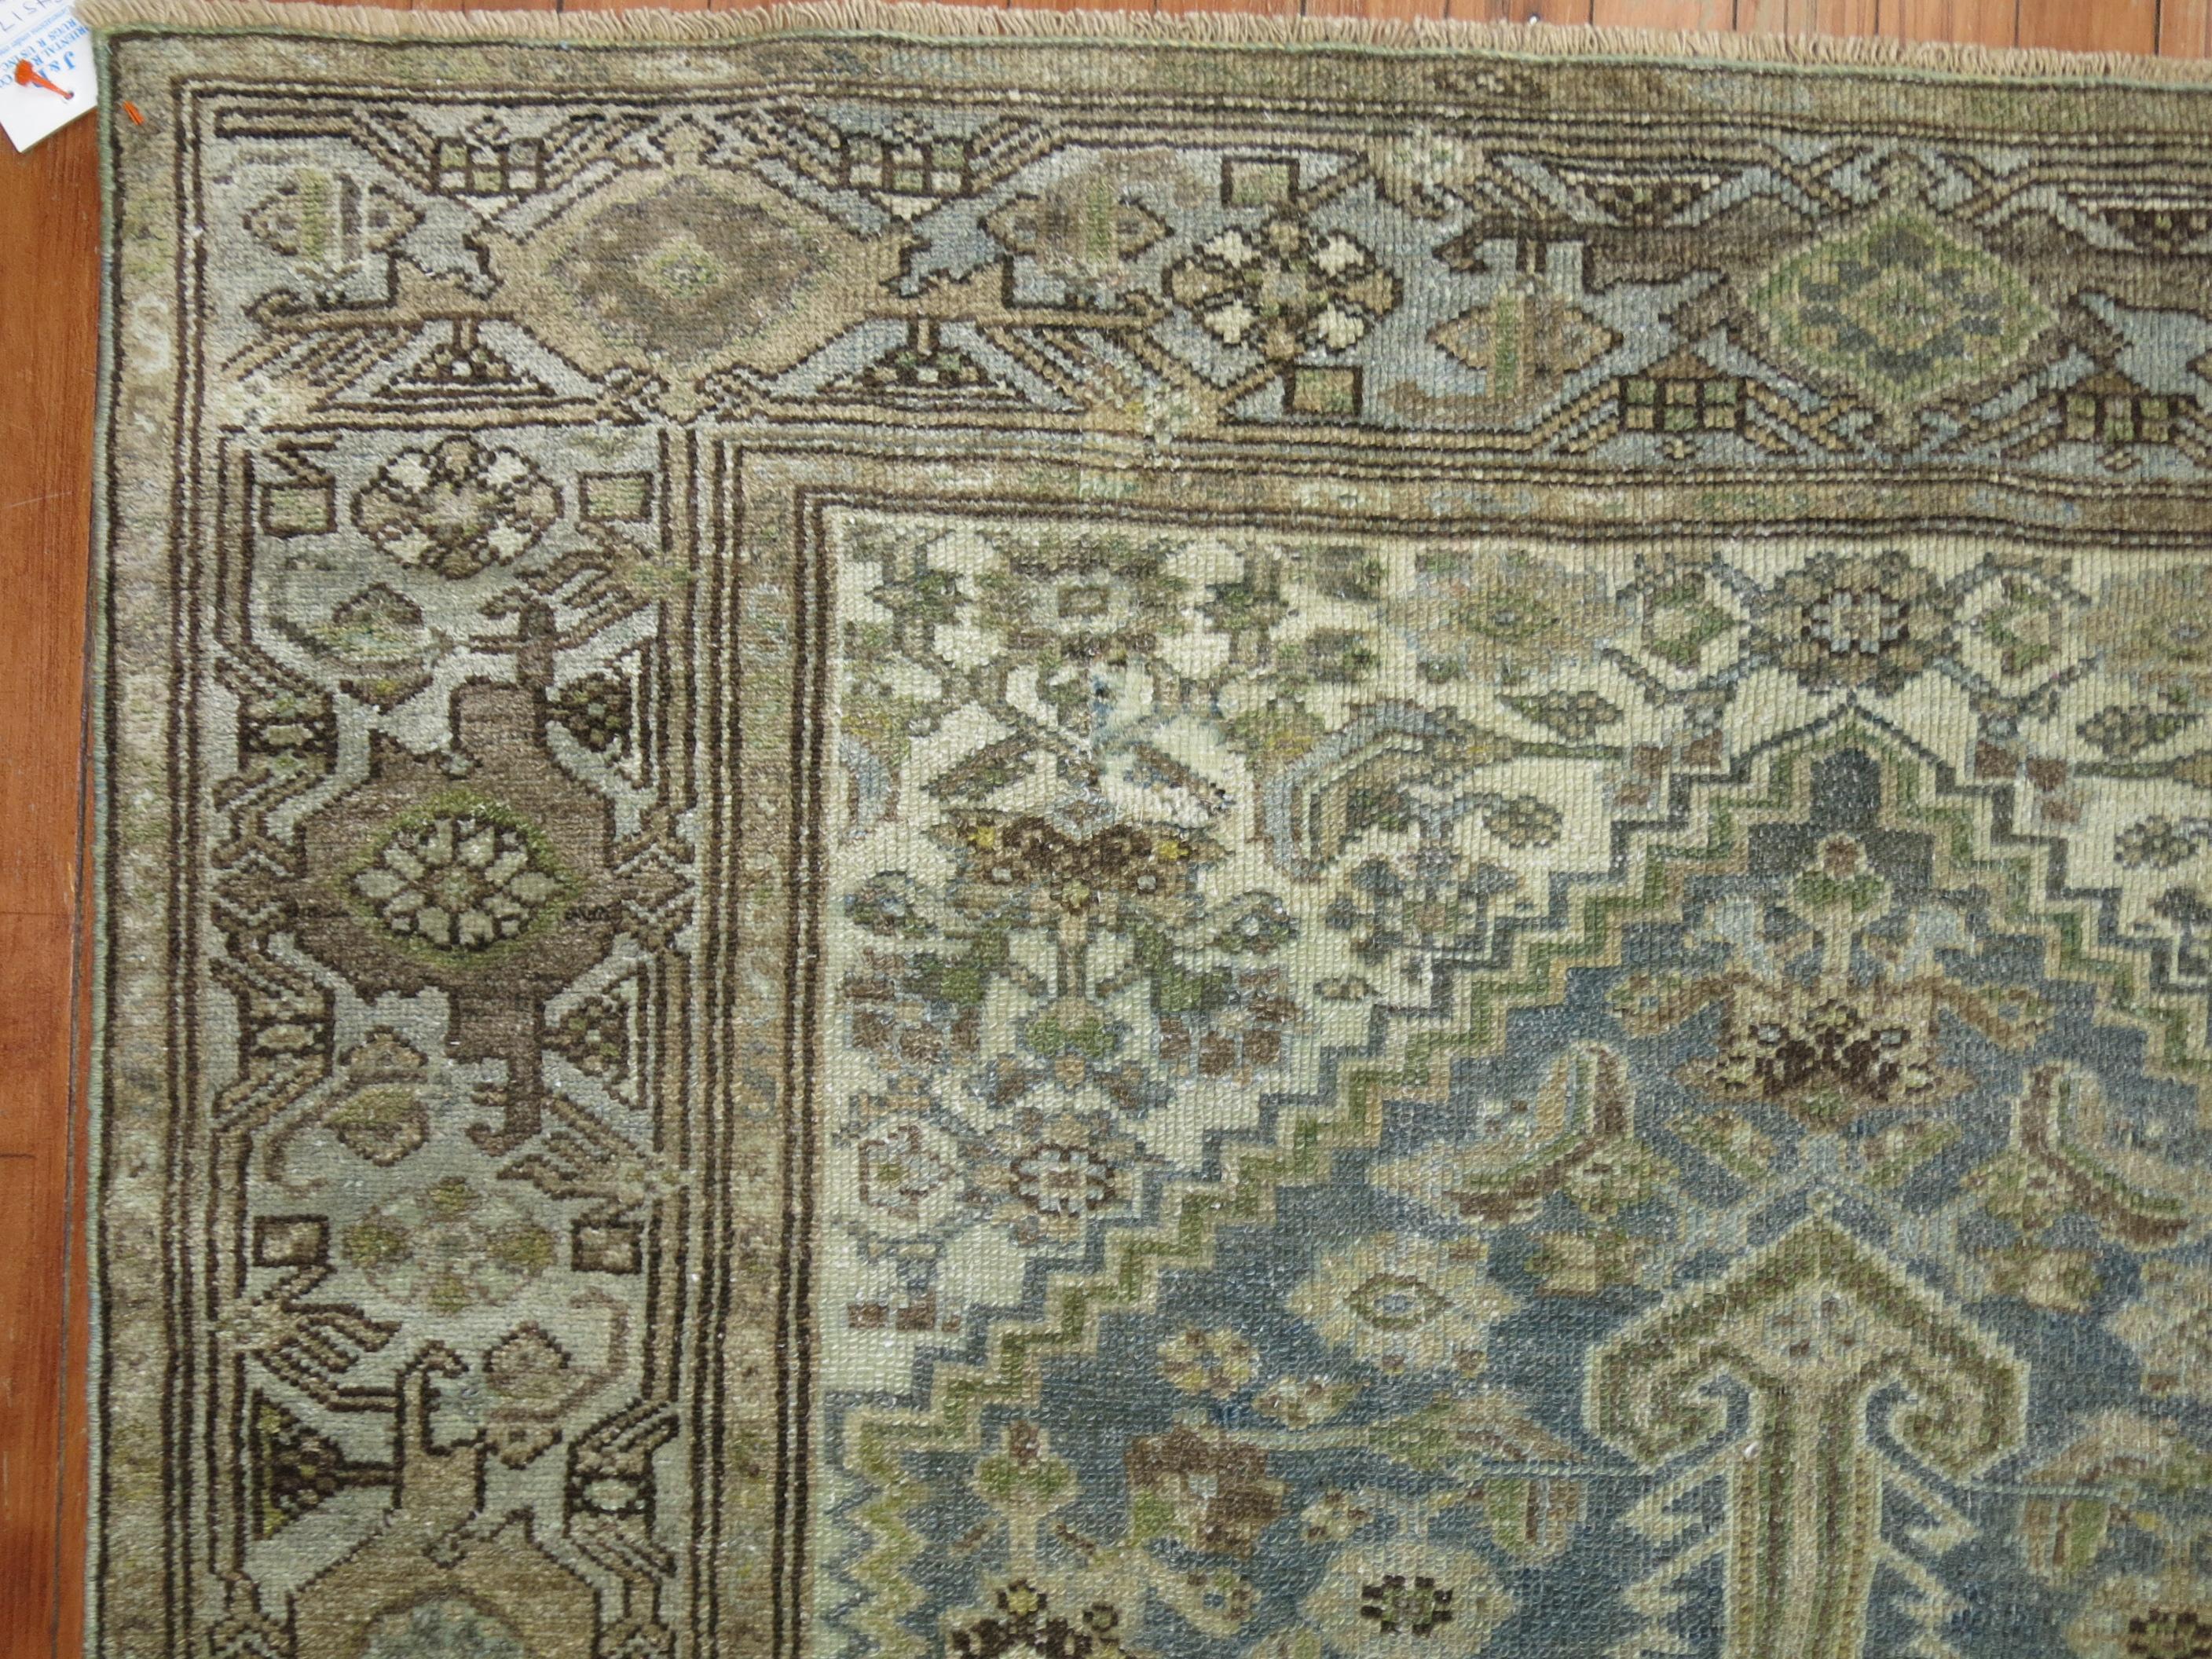 High Decorative One of a kind Geometric Persian Malayer rug

Measures: 4'5'' x 6'5''.